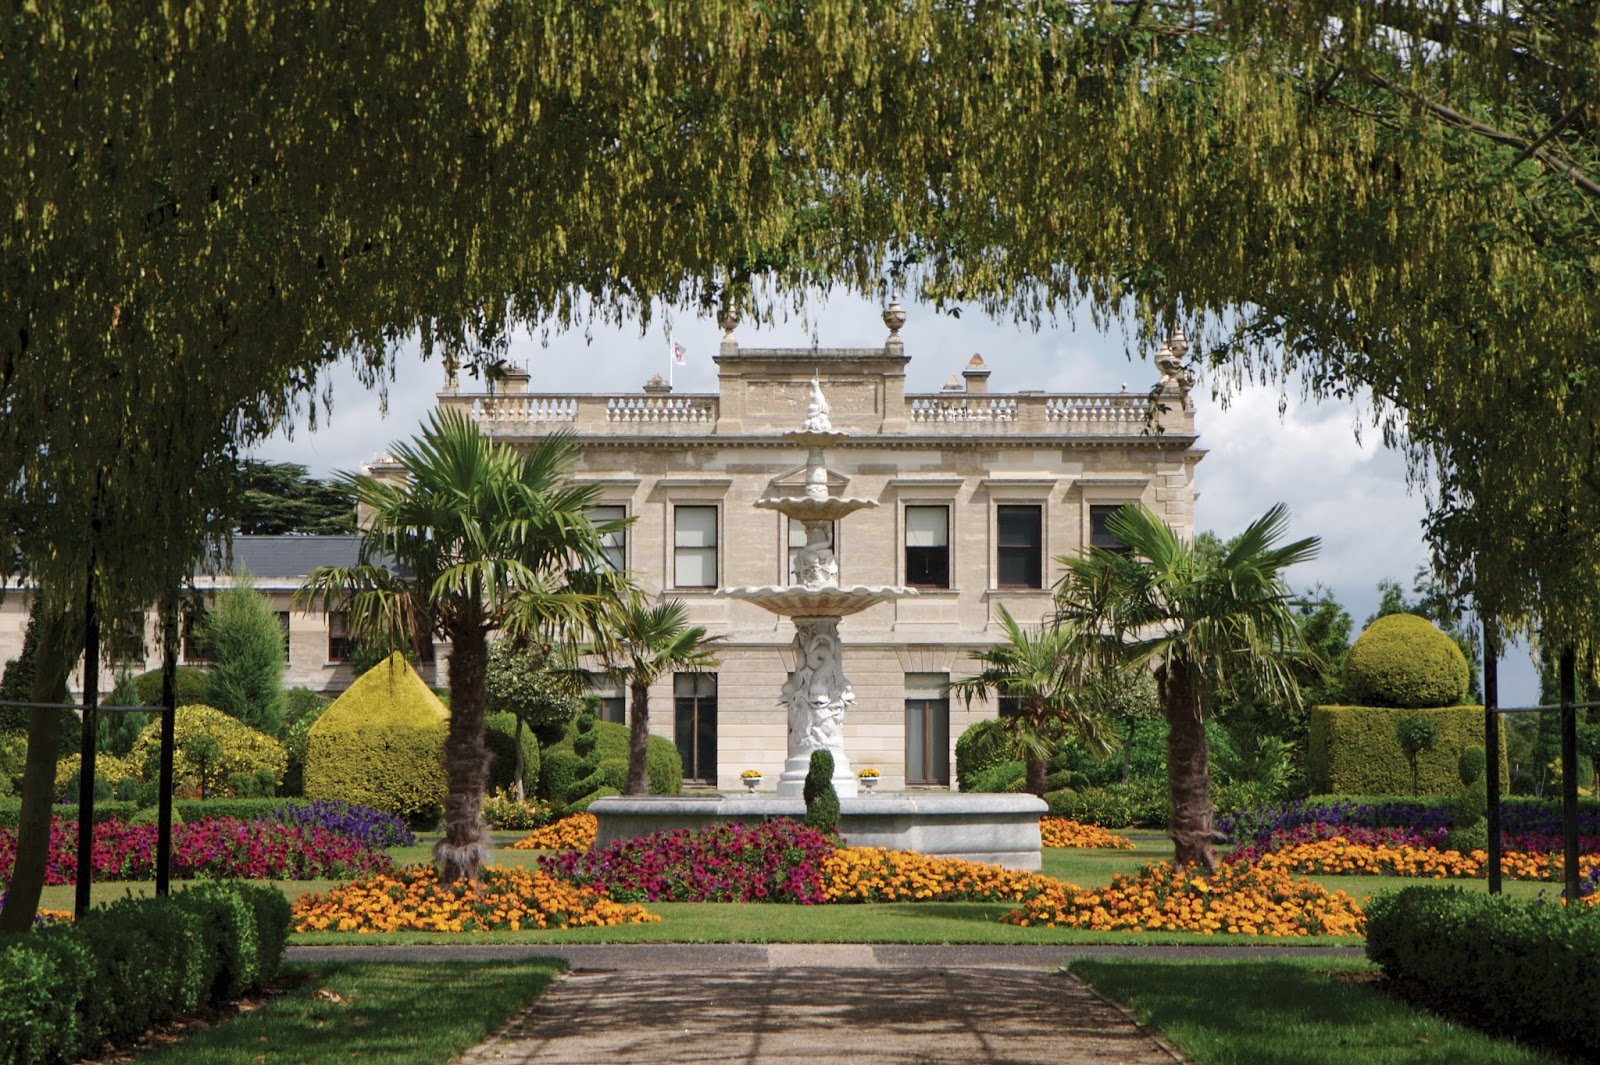 https://whatremovals.co.uk/wp-content/uploads/2022/02/Brodsworth Hall and Gardens-300x200.jpeg